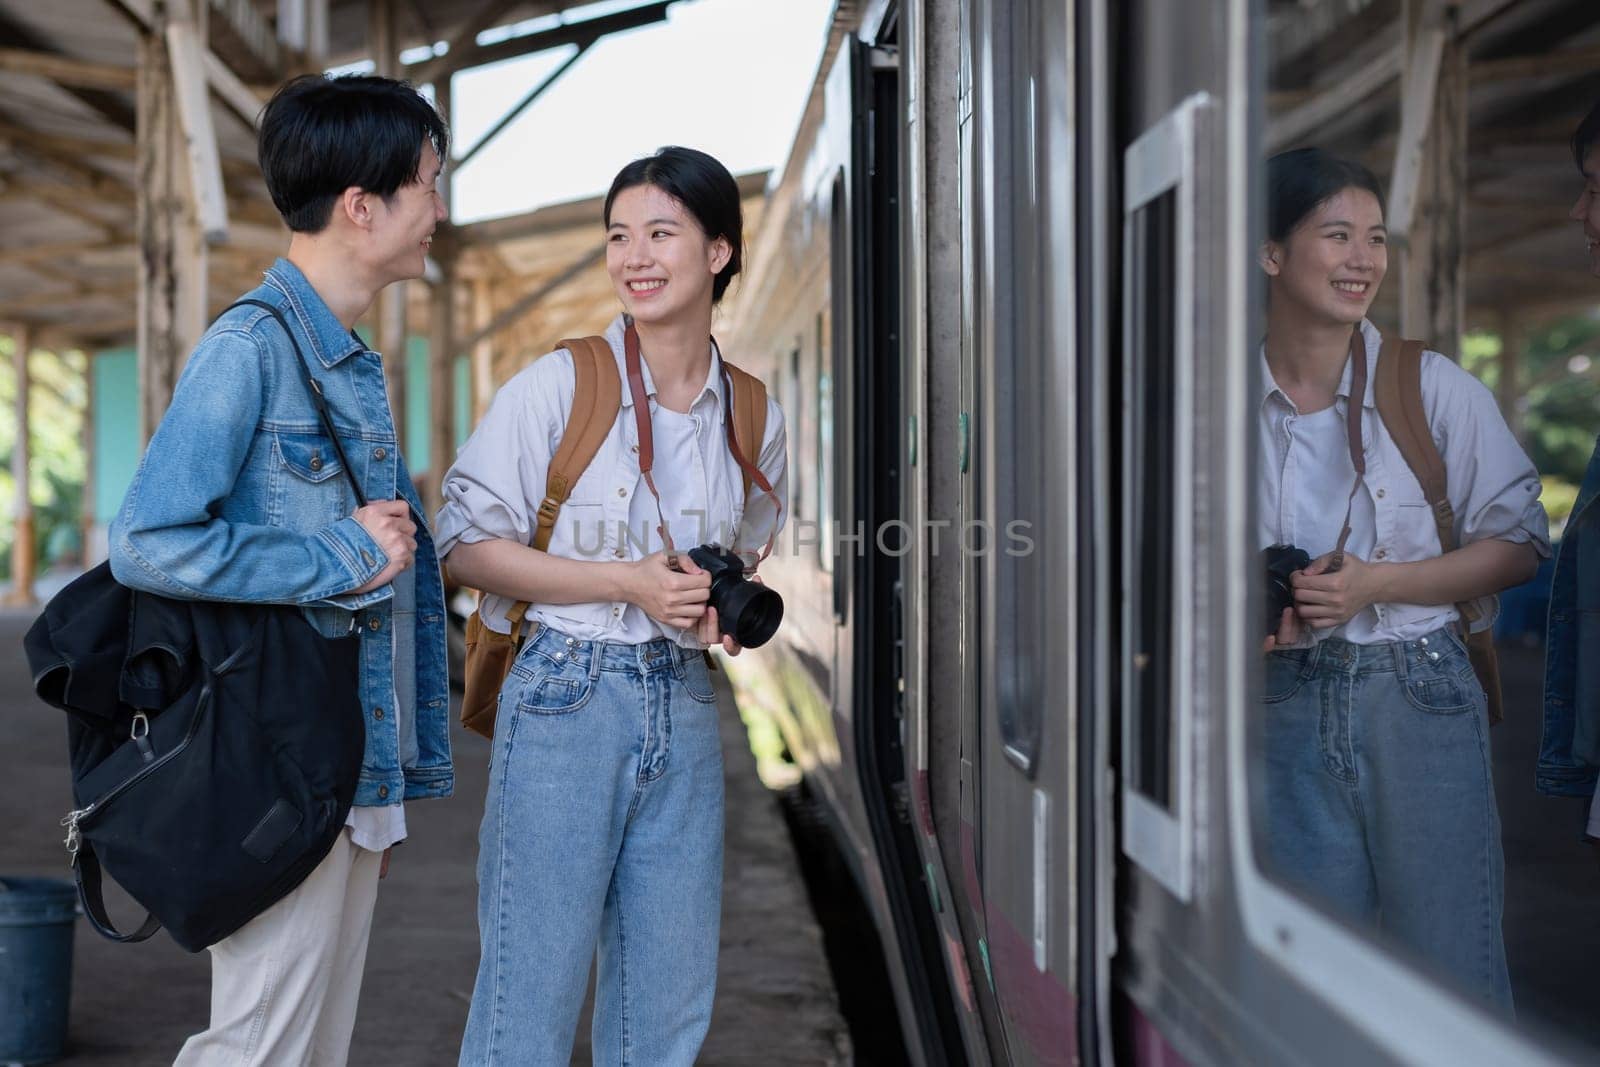 Happy young Asian couple carrying backpacks and cameras preparing to wait for the train at the train station waiting for their vacation trip together..